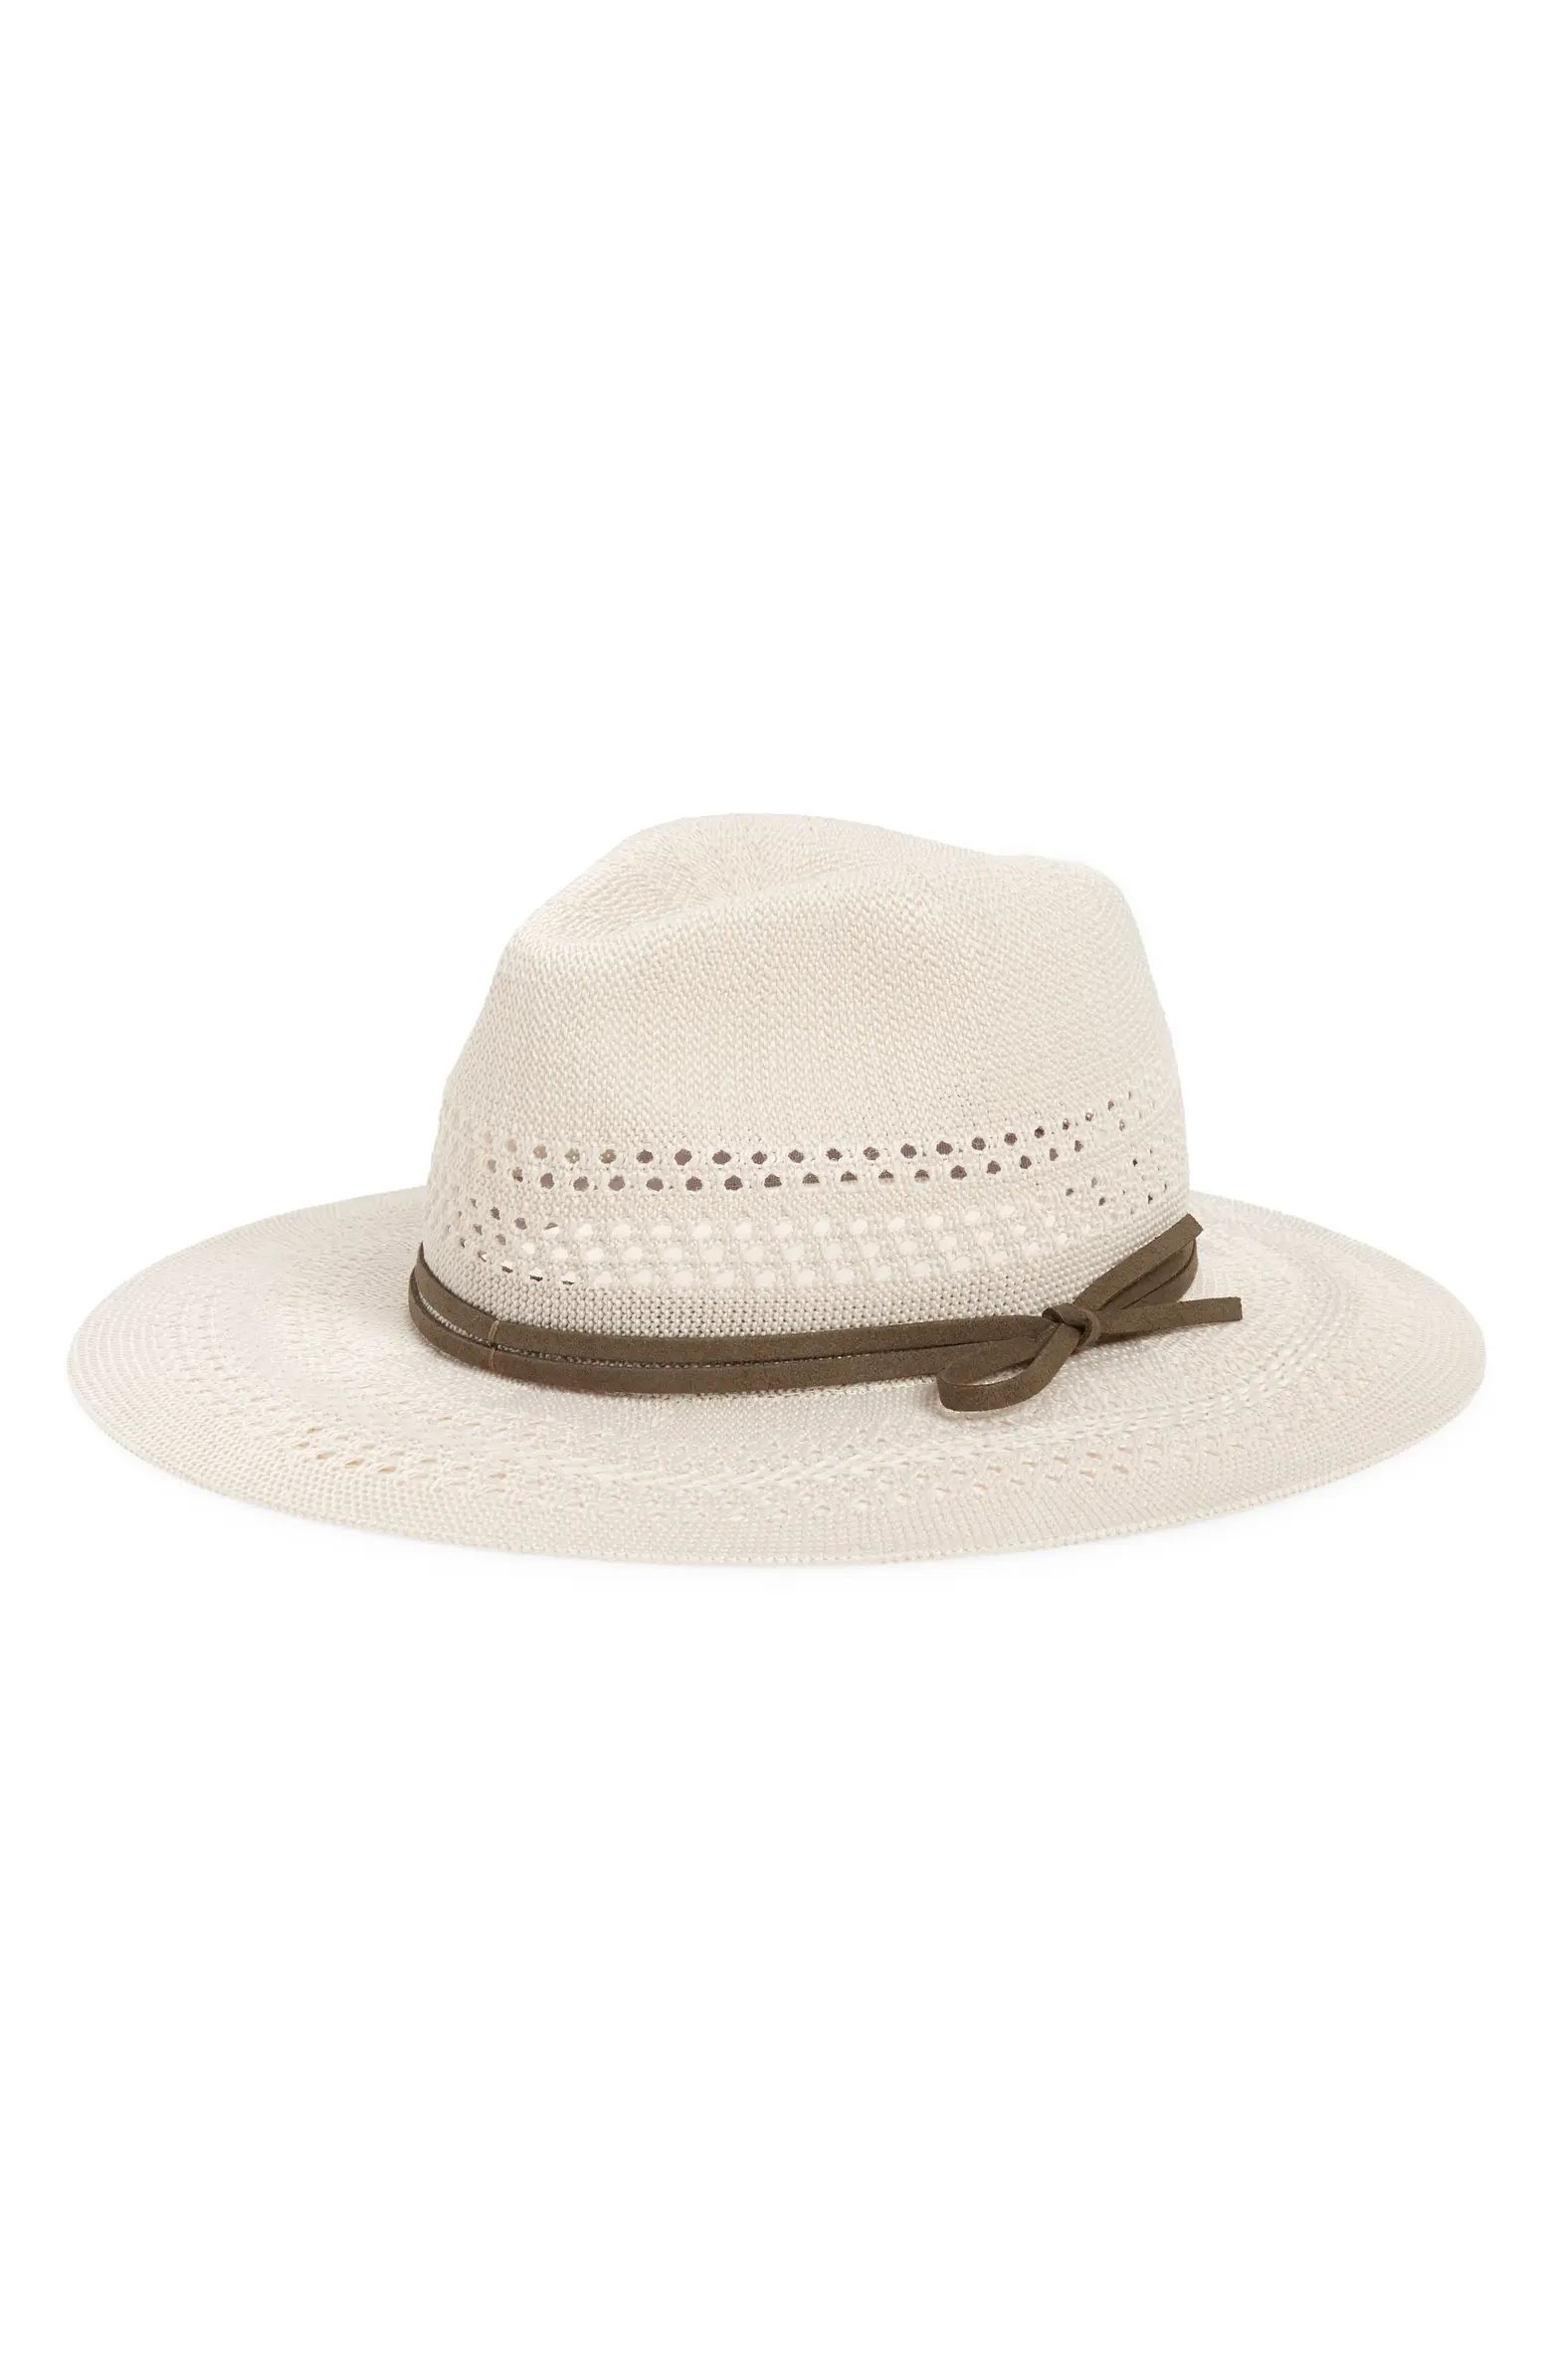 Packable Knit Panama Hat | Nordstrom